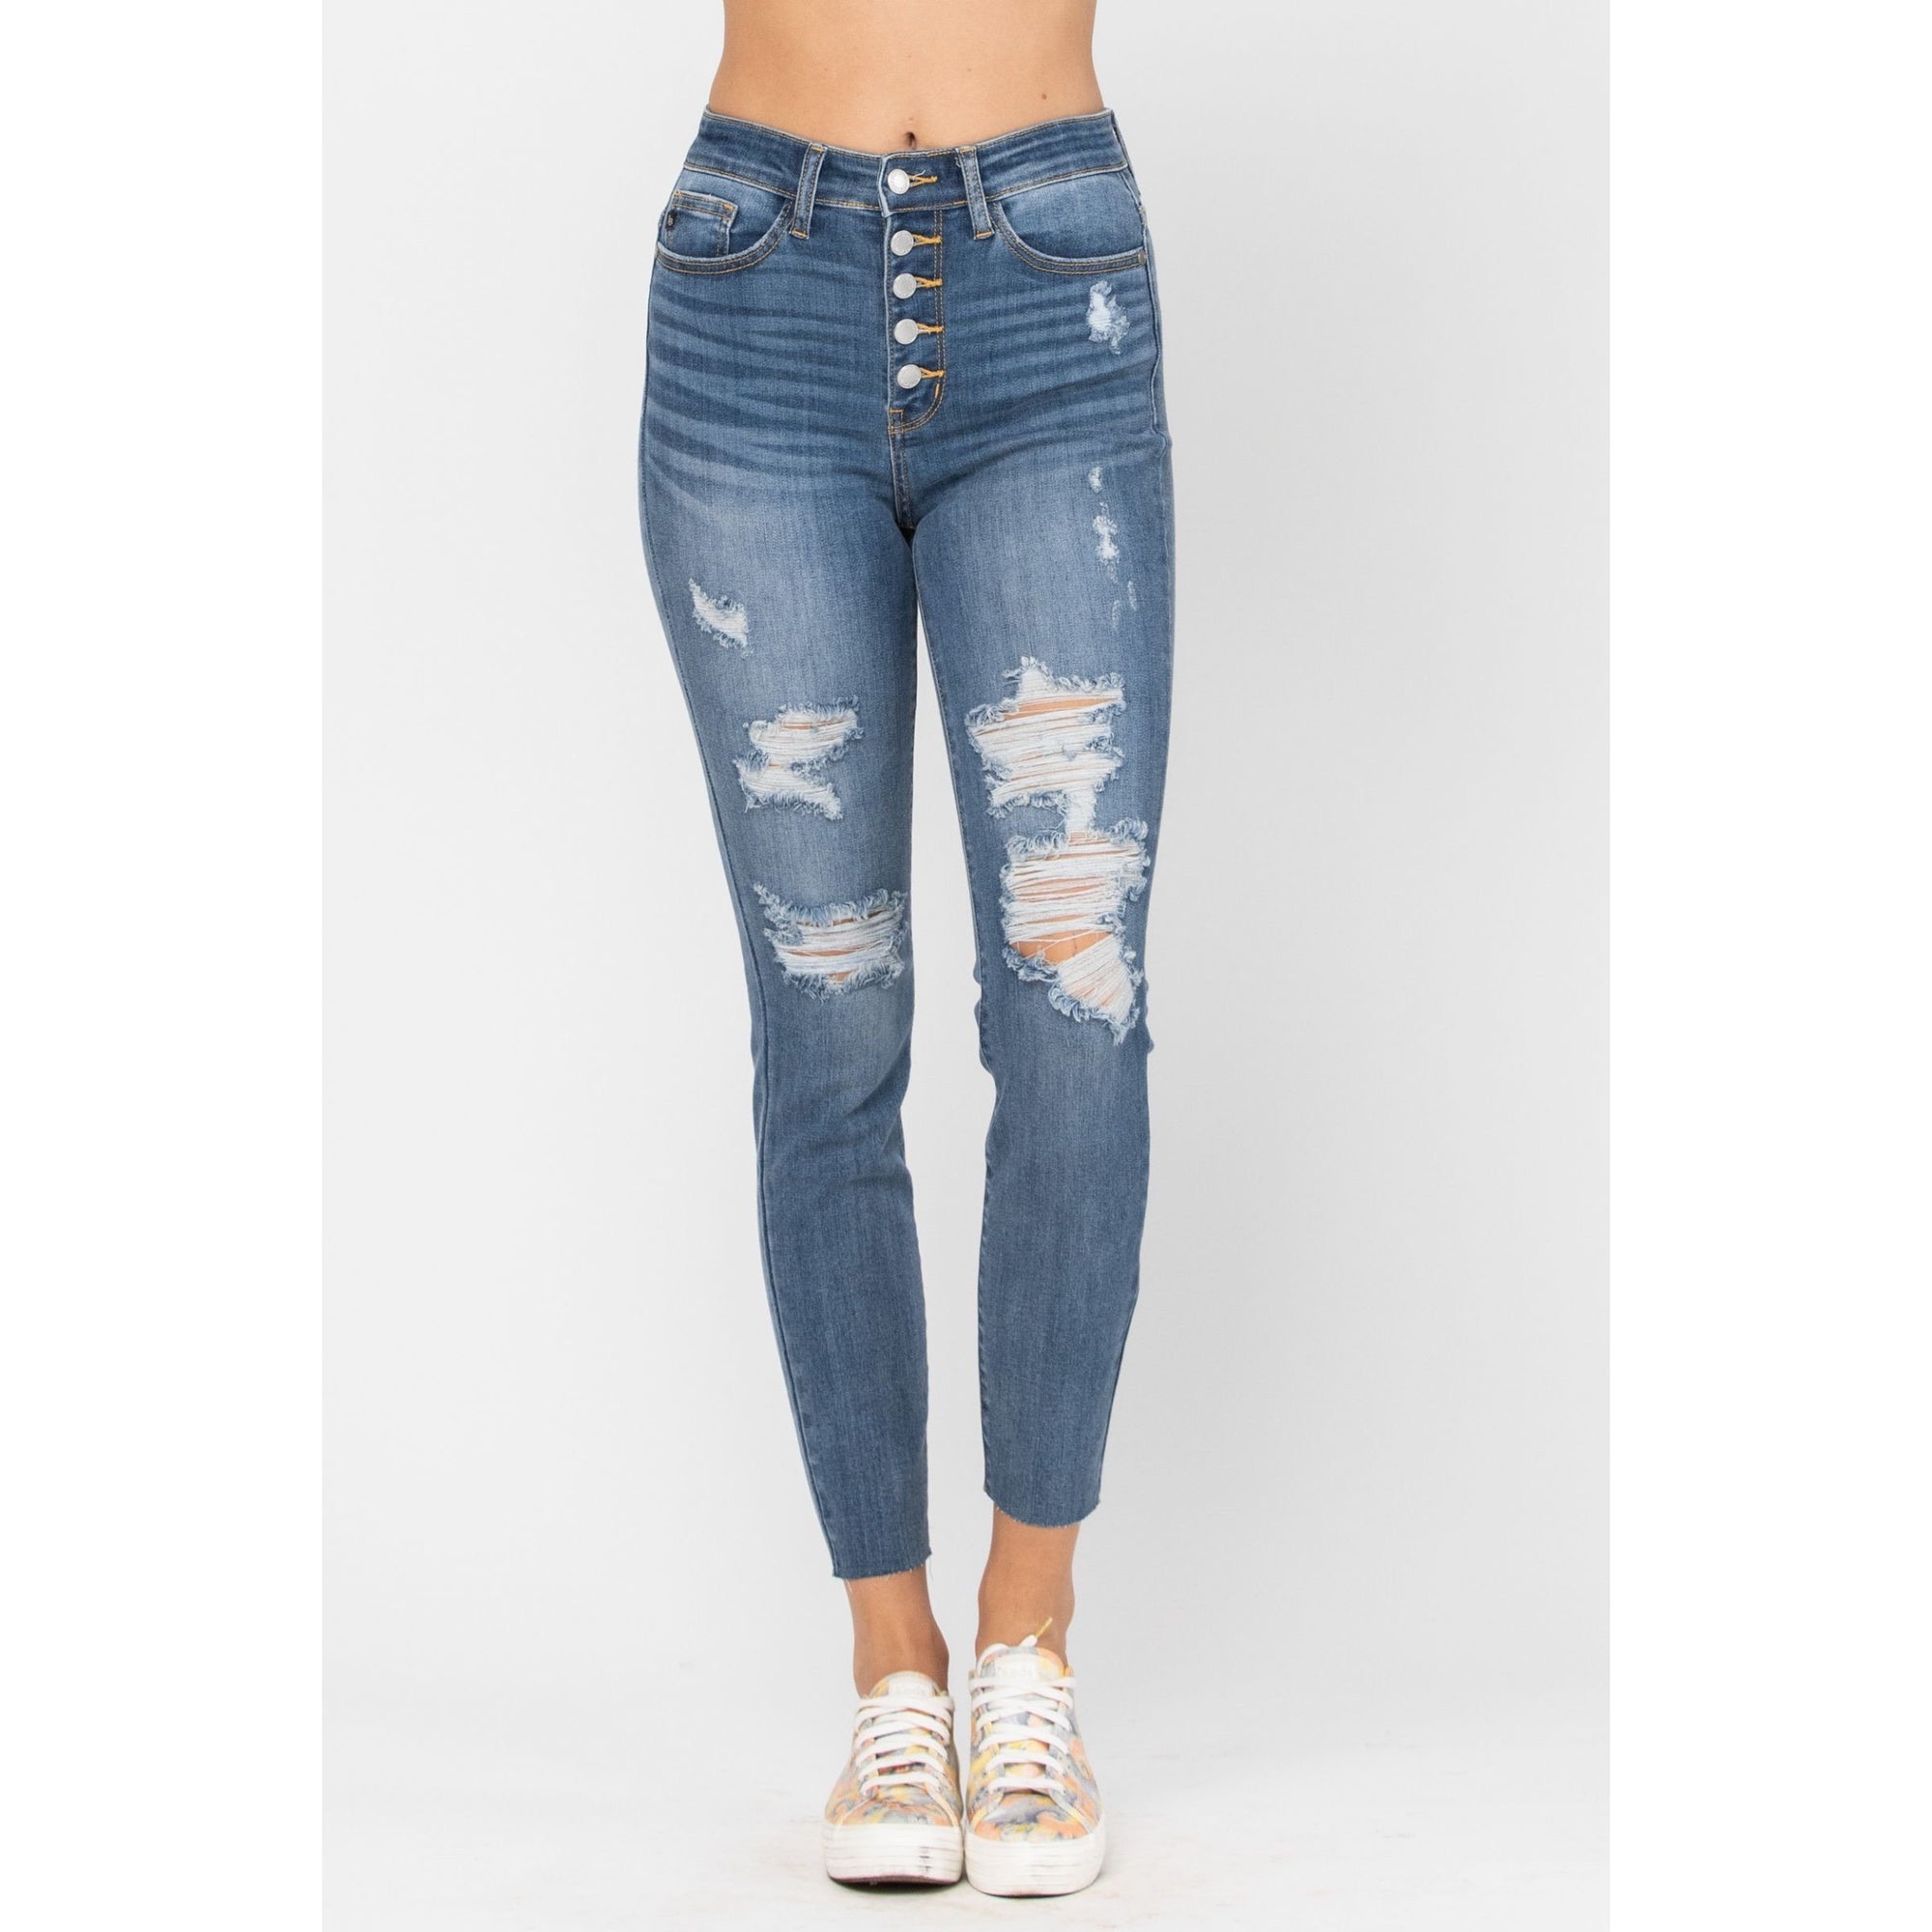 Judy Blue Destroyed Button Fly Skinny Jeans - Style 82171